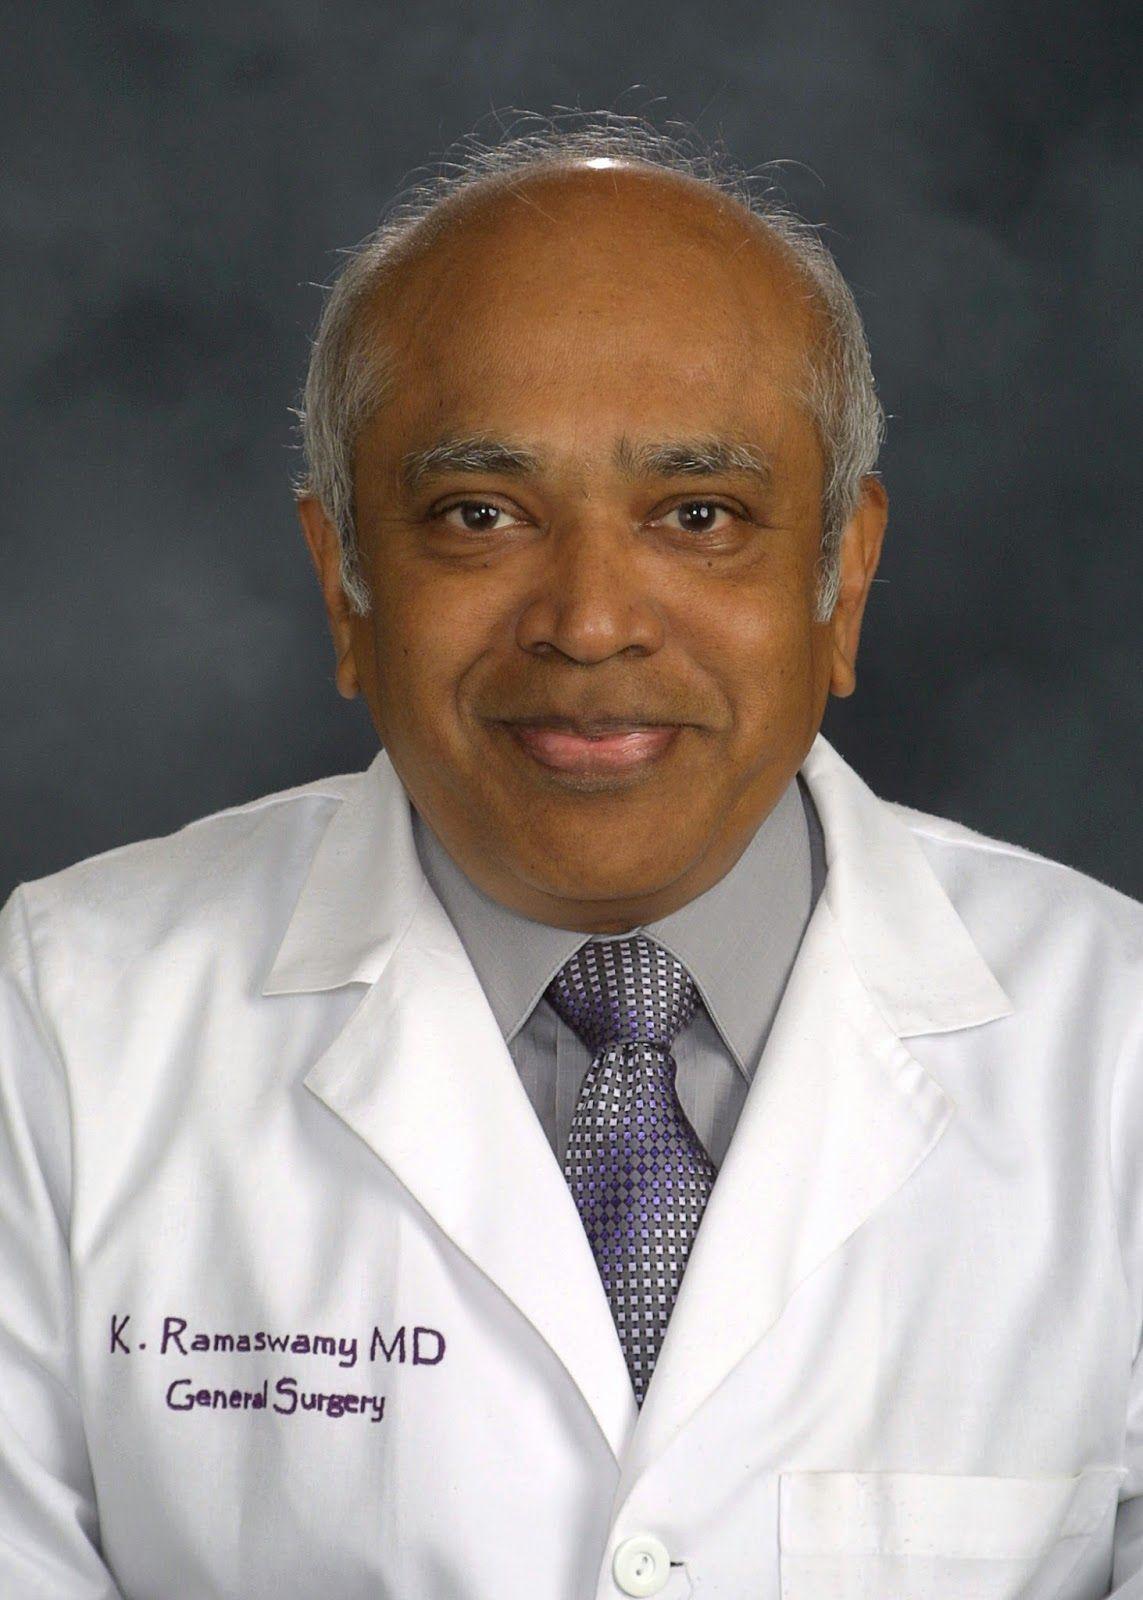 Regional Surgical Specialists Logo - Dr. Kolandaivelu Ramaswamy joins Regional Surgical Specialists